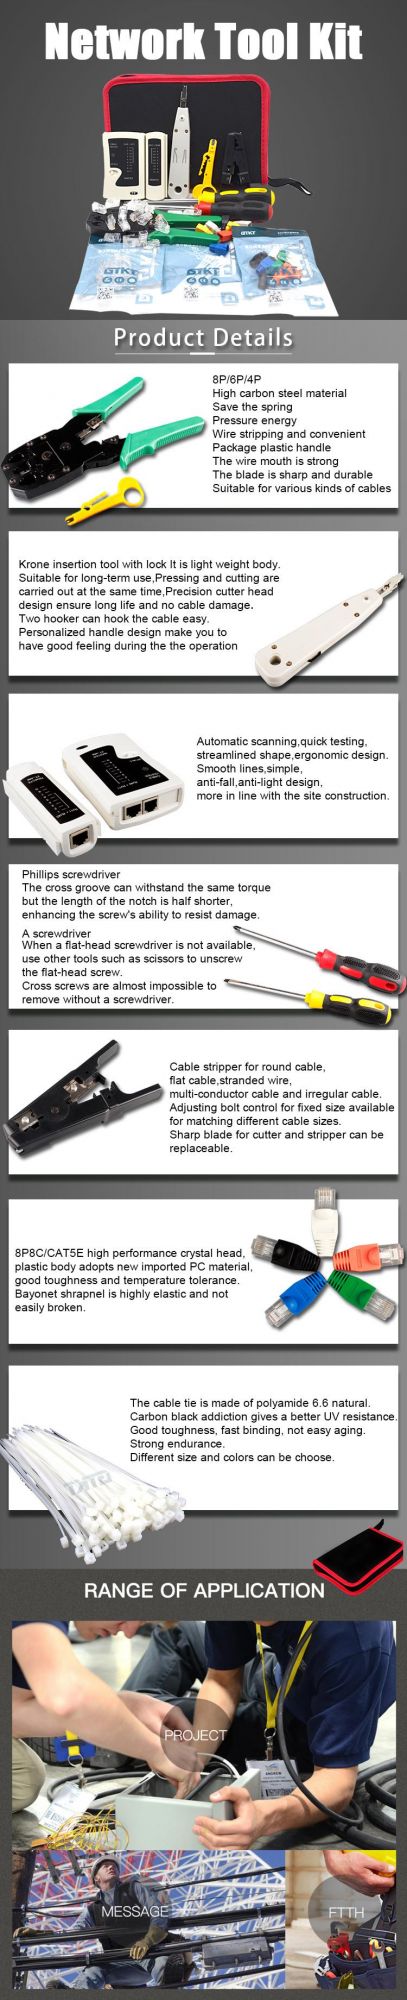 Gcabling Computer Tester Krone Insertion Tool Hand Crimping RJ45 Connector Ethernet Crimping Tool Kit